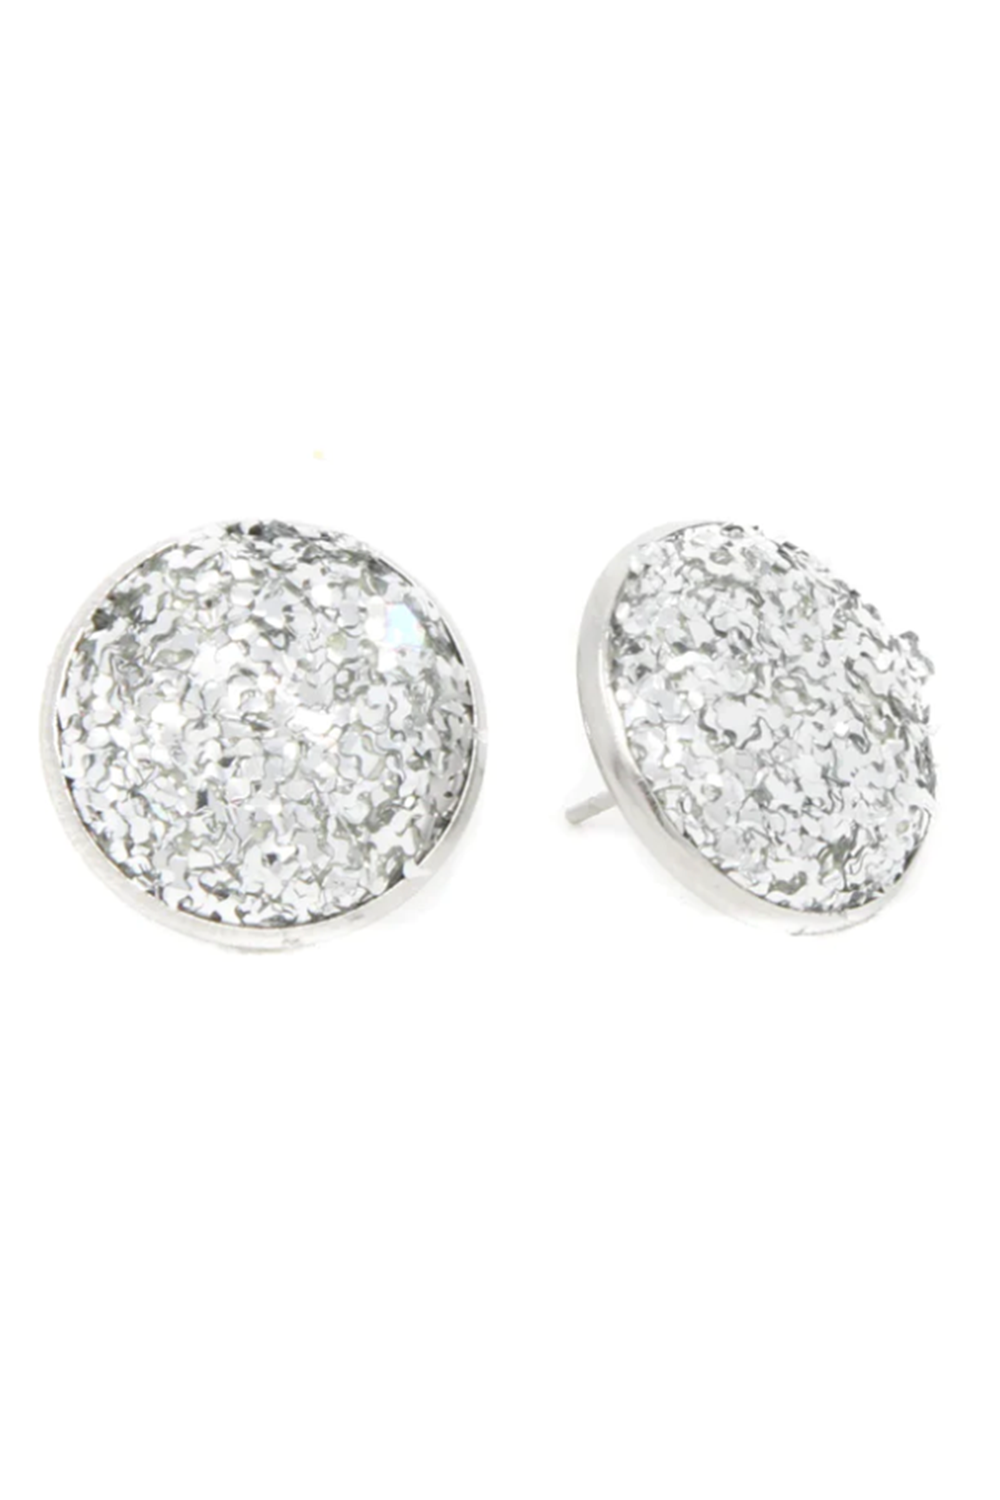 Keva "Full Circle" Button Earring - Sparkle in Silver